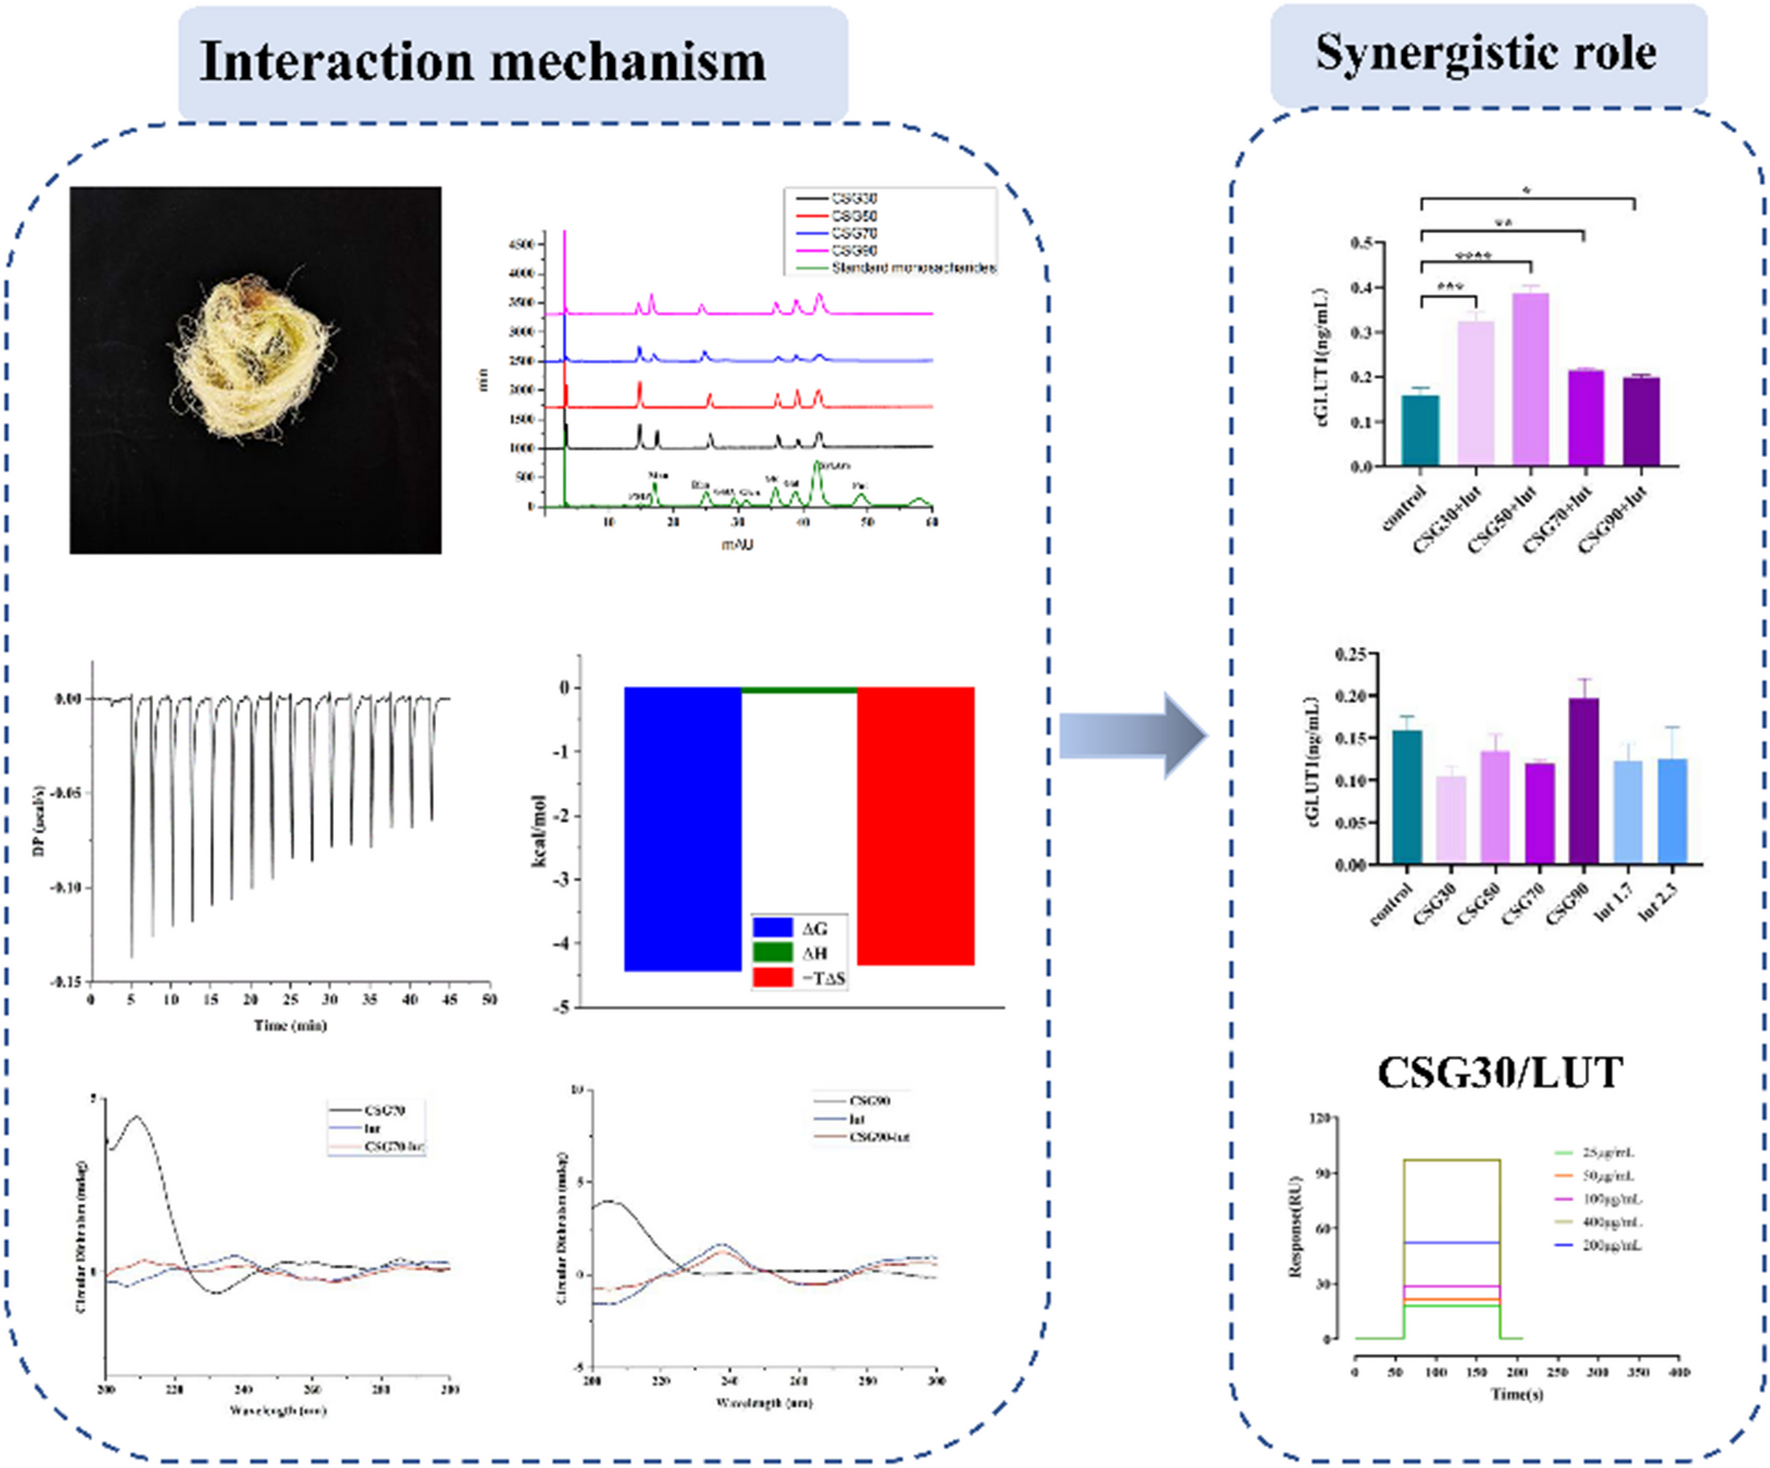 Interaction mechanism between luteoloside and corn silk glycans and the synergistic role in hypoglycemic activity